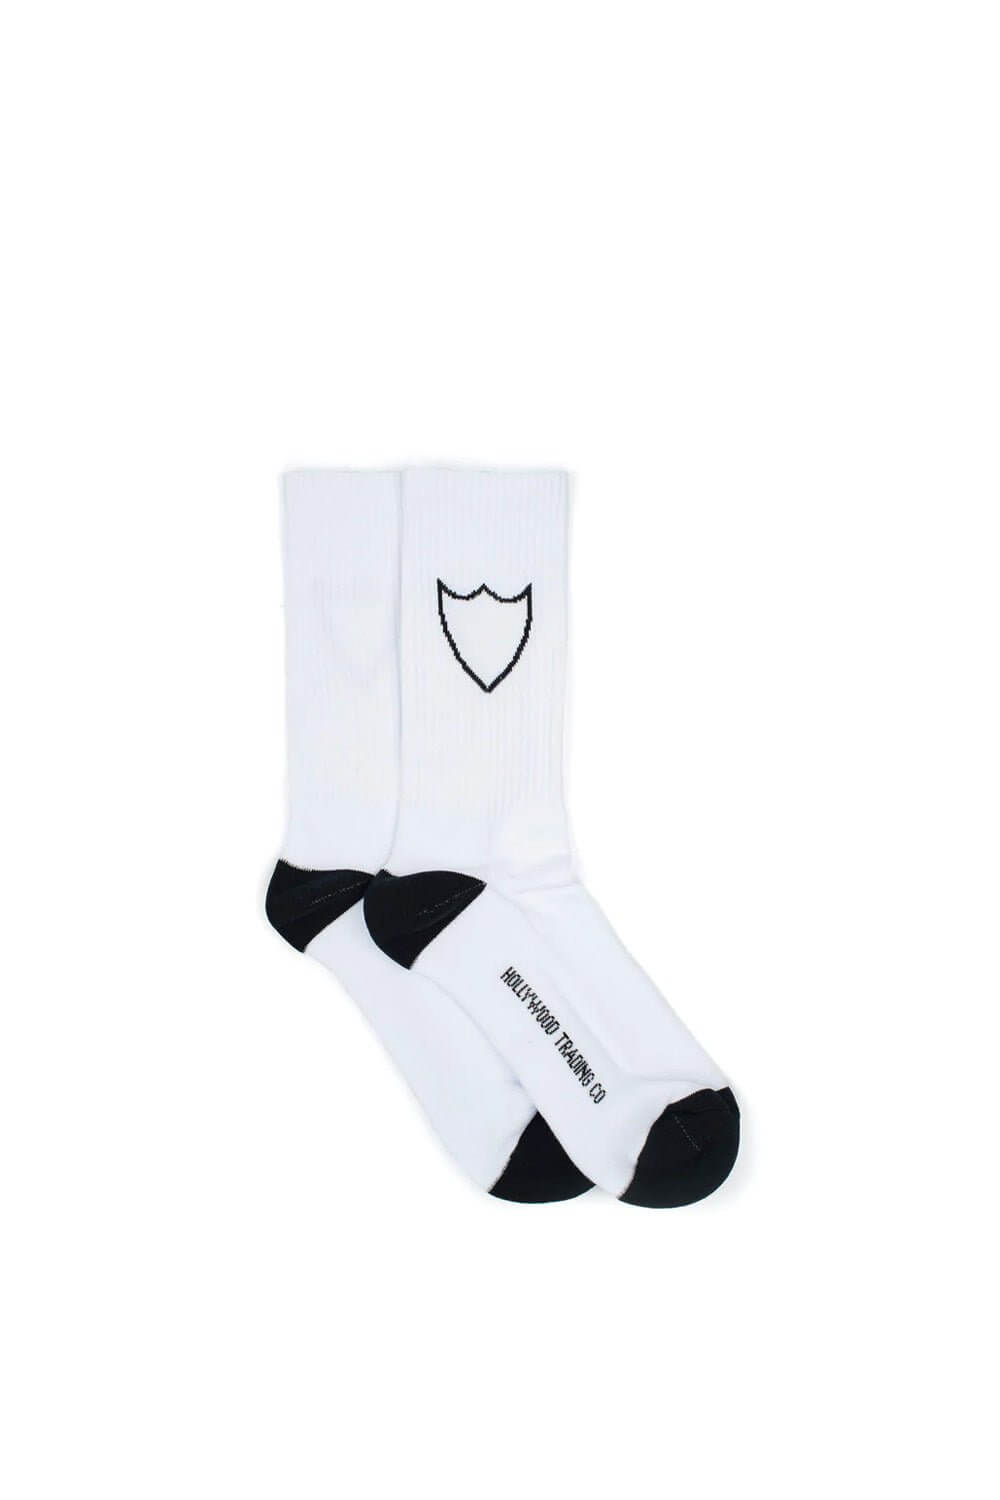 HTC WOMAN SOCKS Signature woman socks with HTC shield logo. 85% Cotton 10% Polyamide 5% Elastane. Made in Italy HTC LOS ANGELES